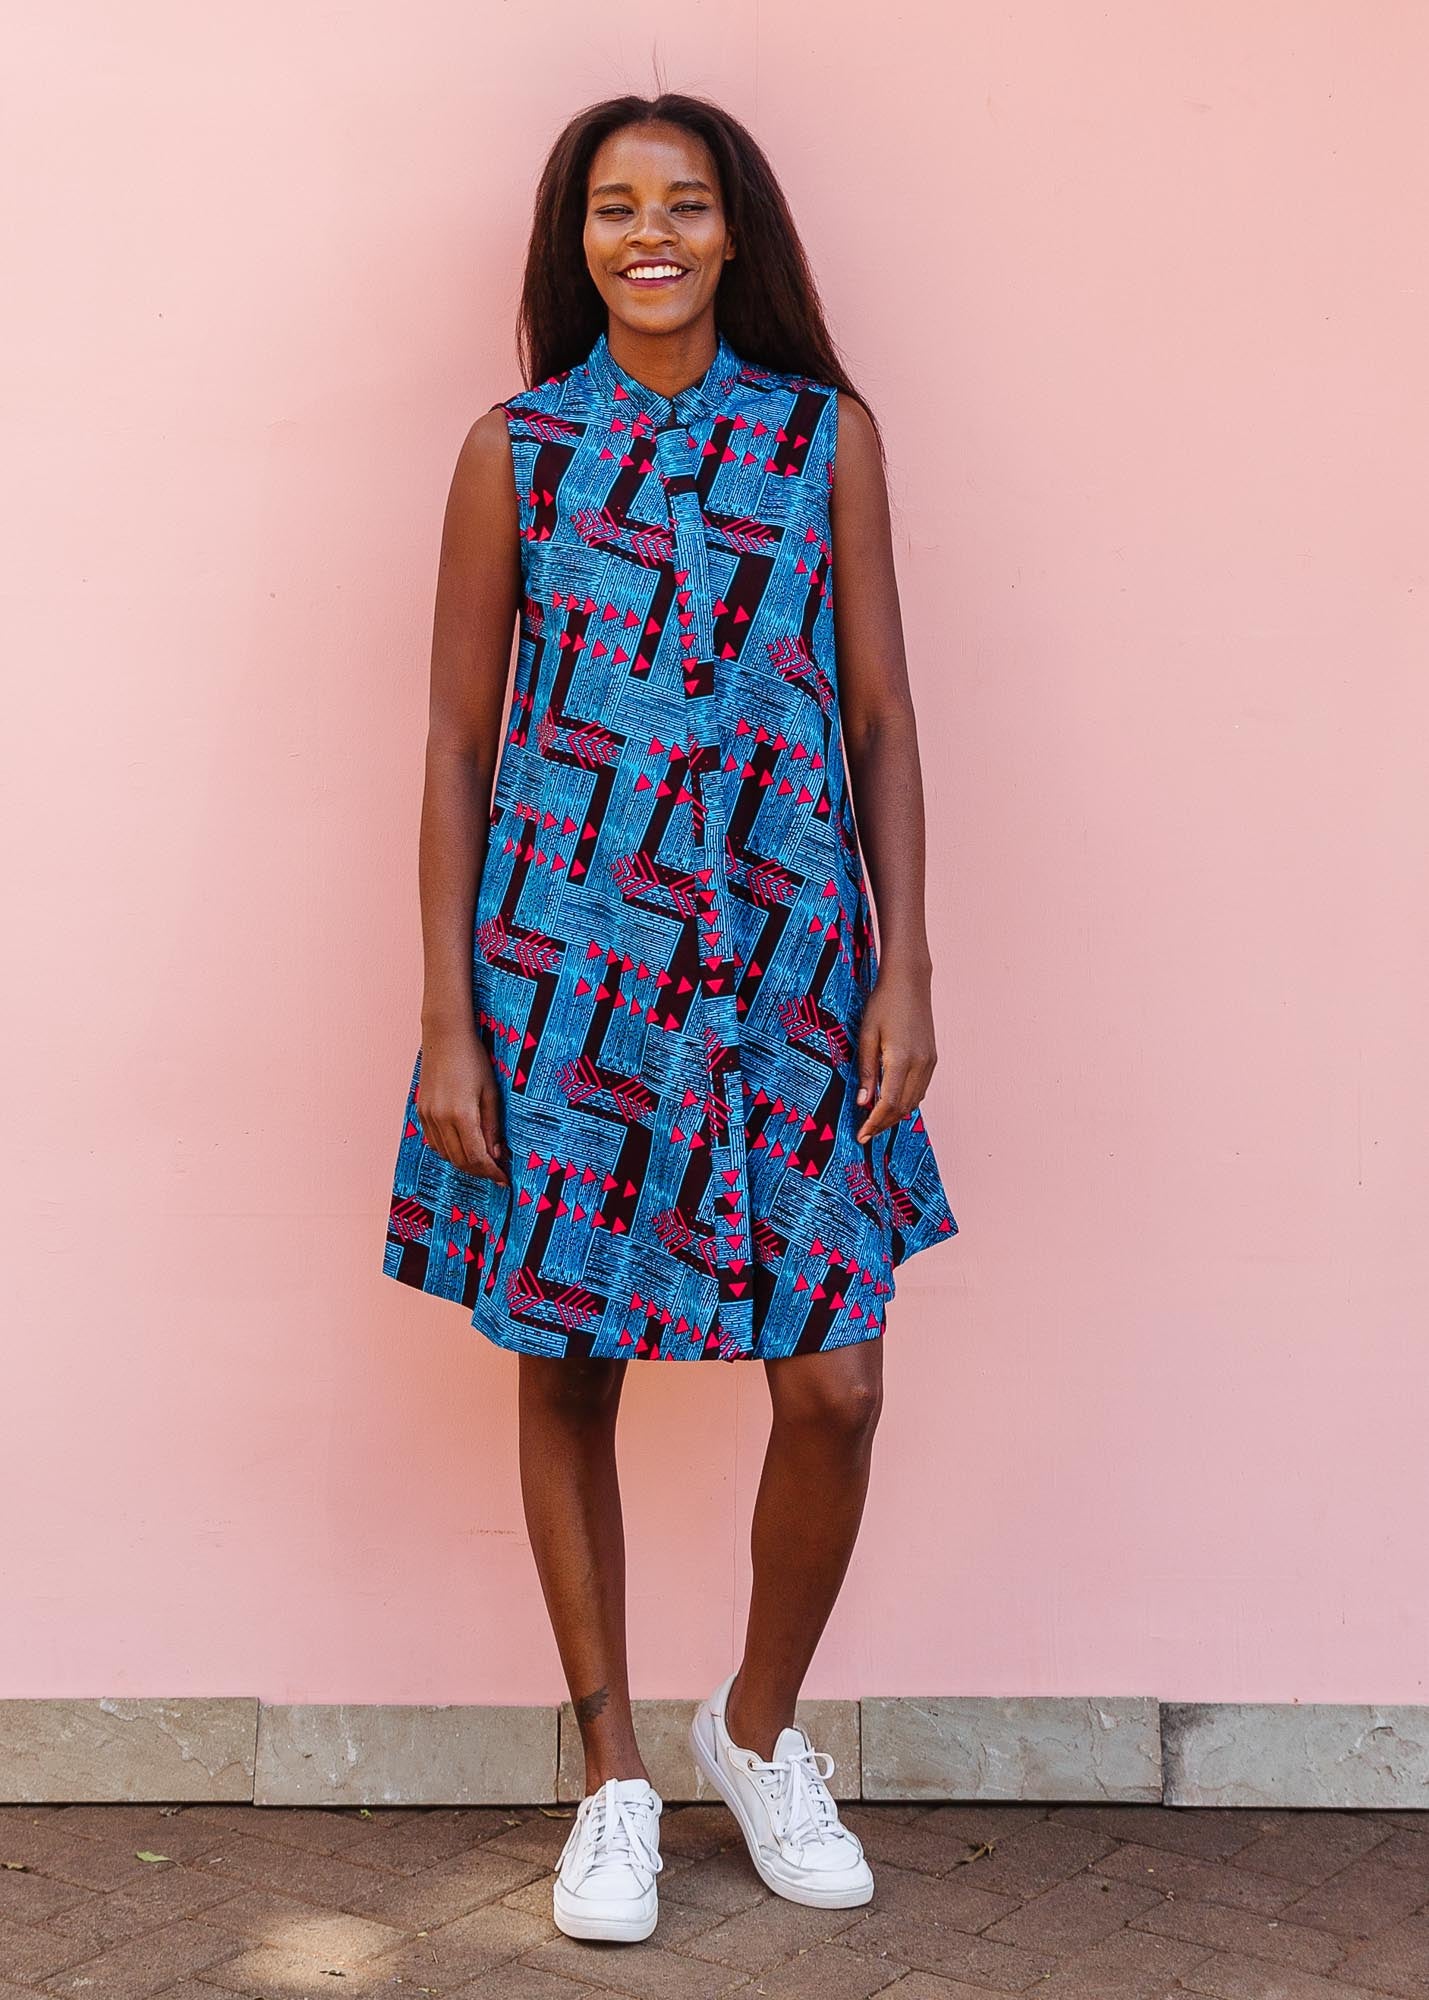 The model is wearing black, blue and hot pink geometric print dress